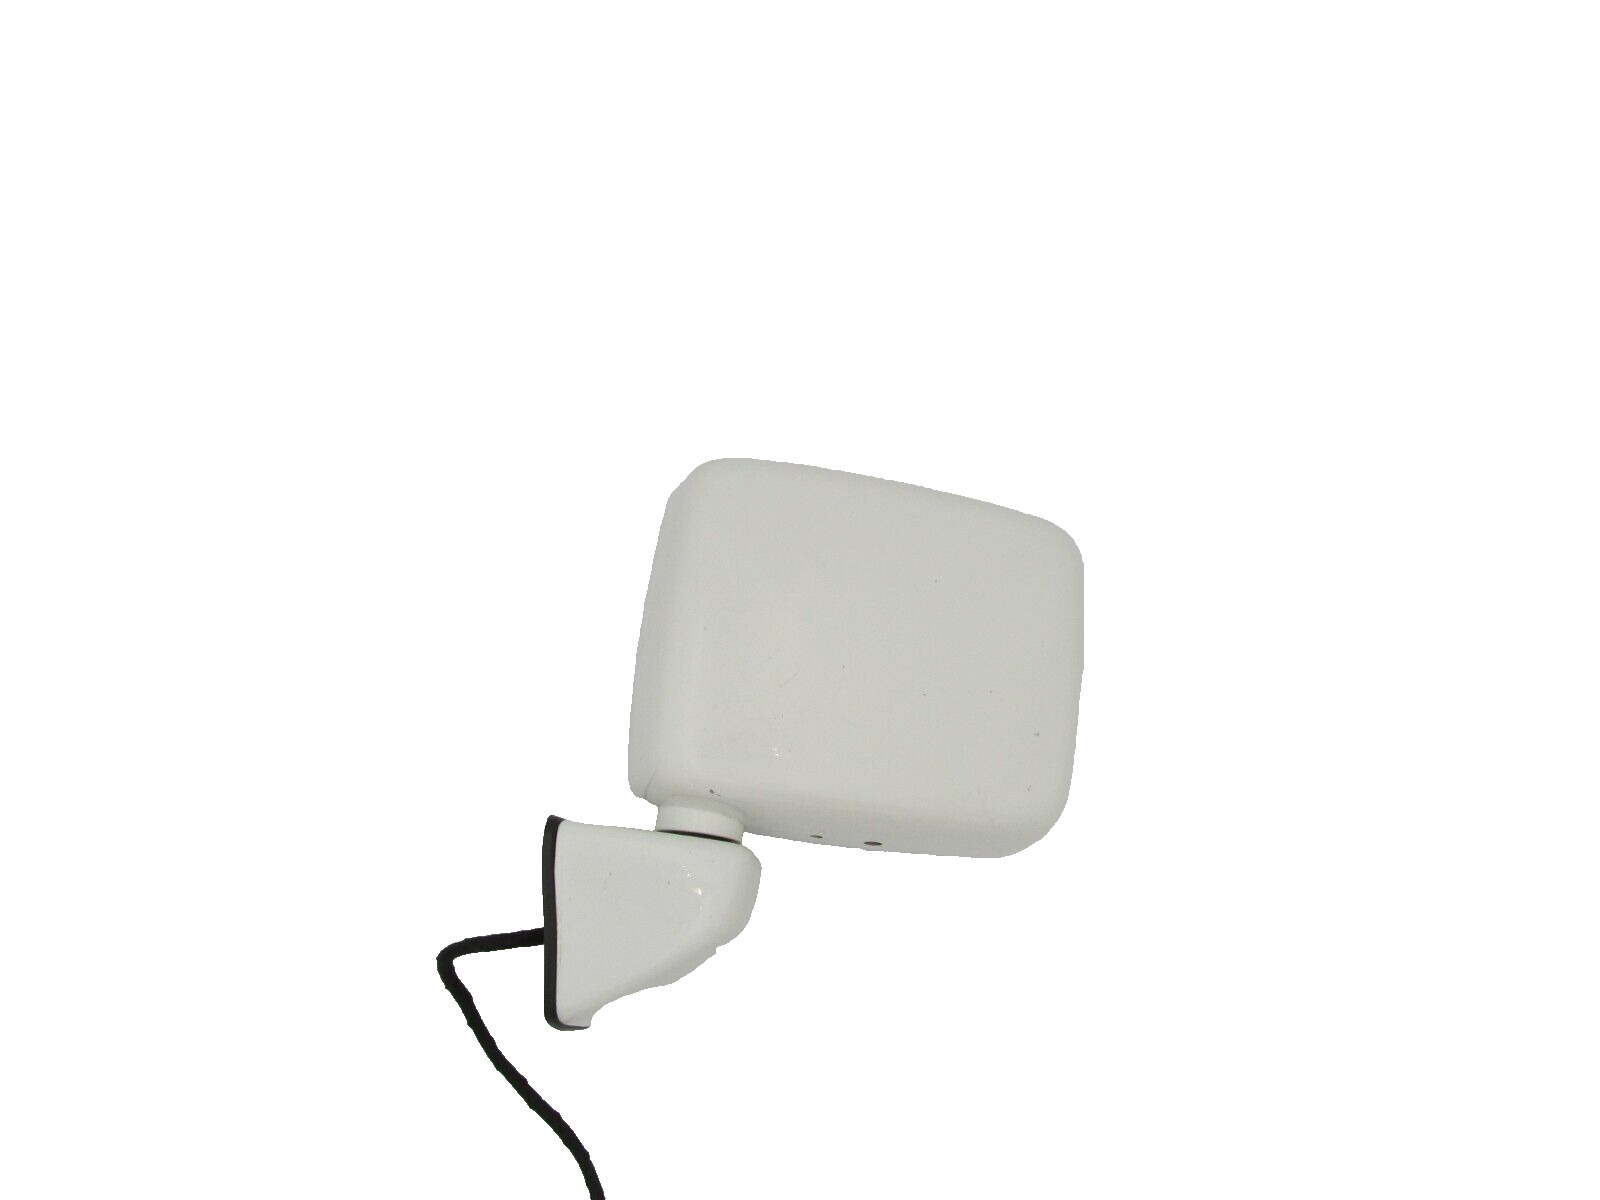 Mercedes G500, G55 Driver's Side Mirror Assembly 2002-2003 (White)